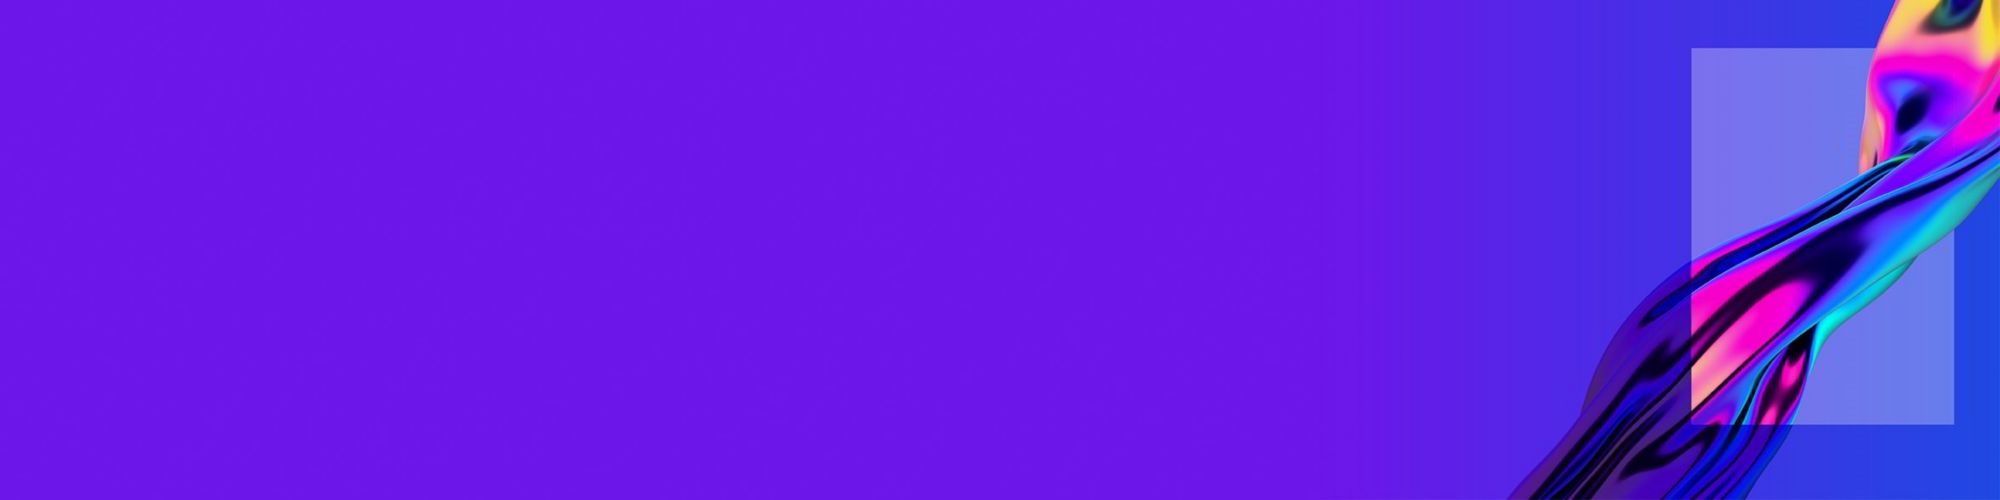 Abstract shape on purple background